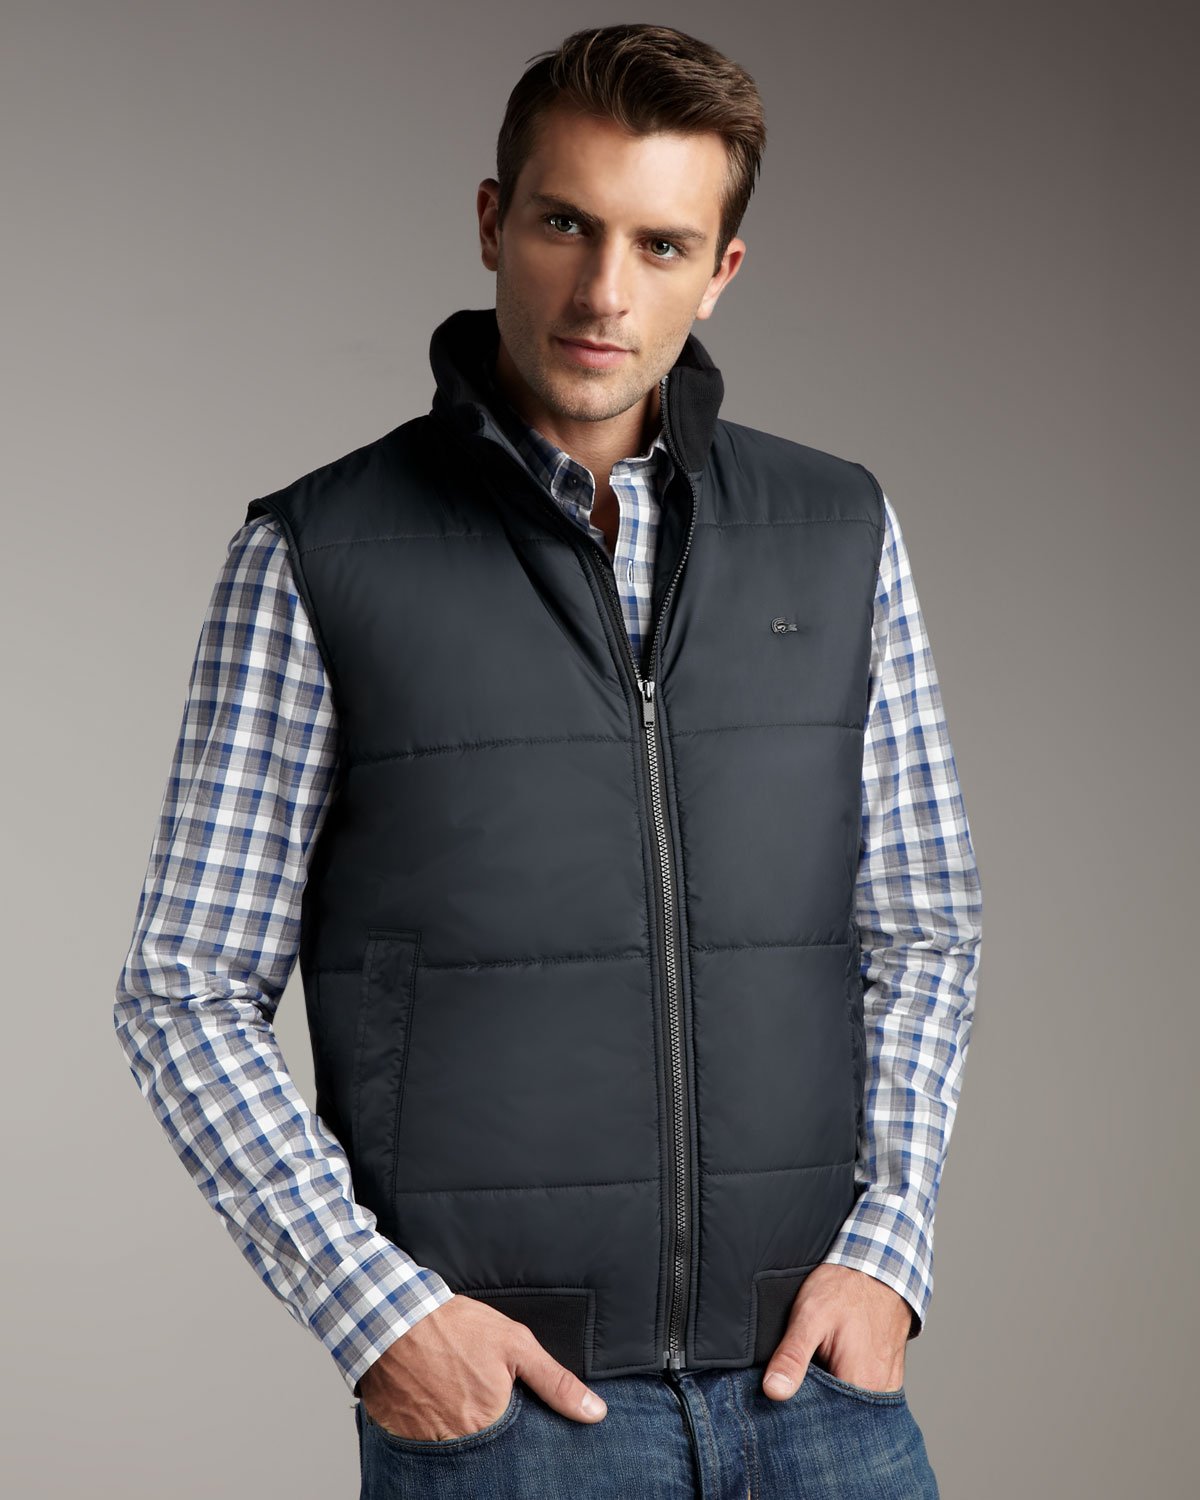 Men S Puffer Vest Sale Literacy Ontario Central South